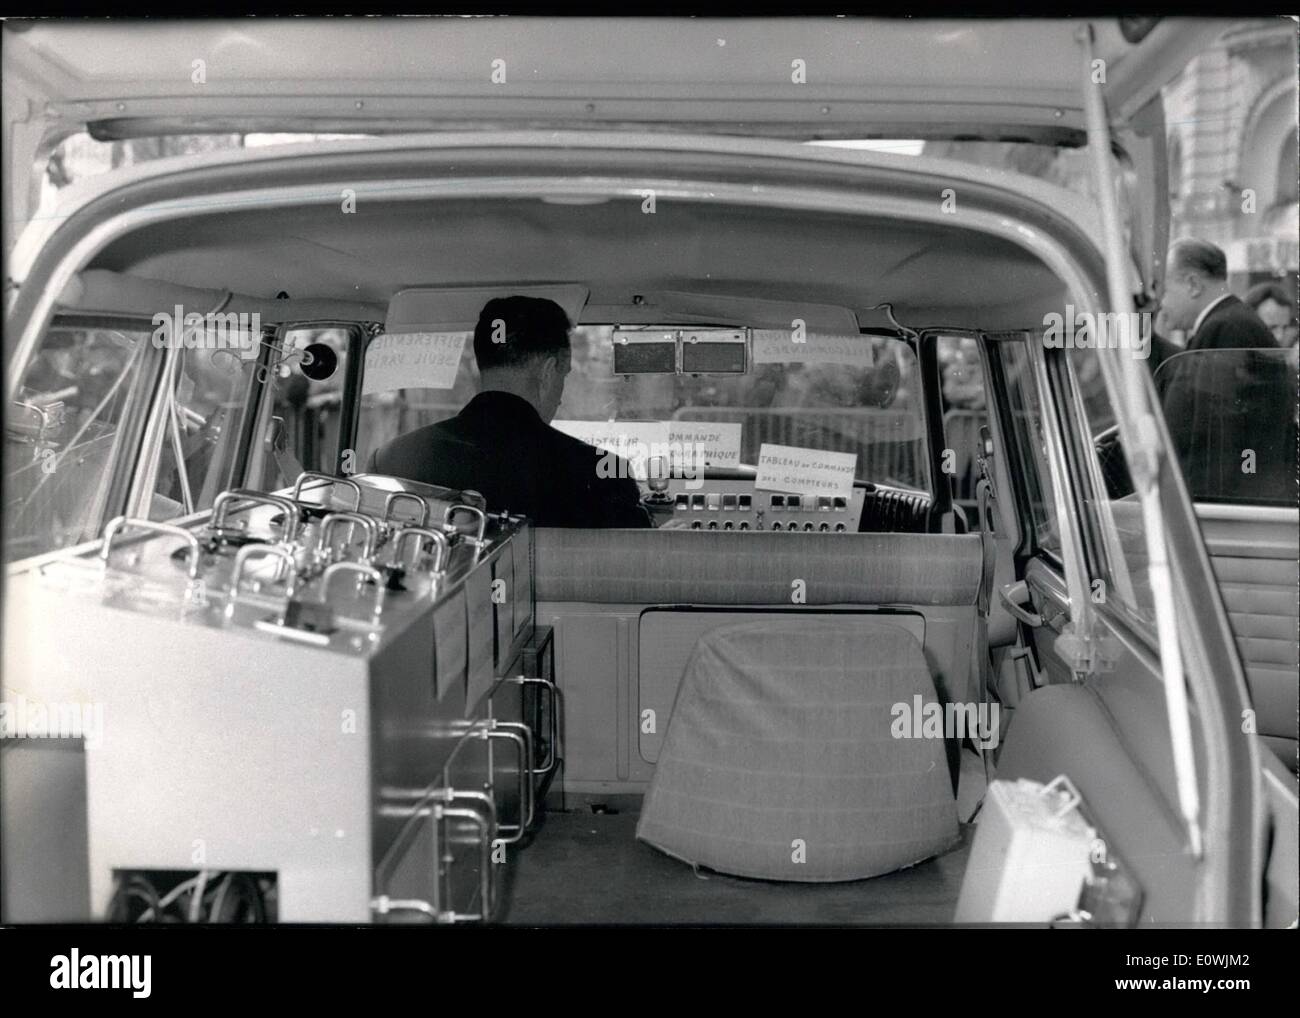 Mar. 03, 1963 - A test car to control drivers infractions ; A specially designed car has been offered to-day to Mr. Jacquet French minister of public works. The car possess the latest electronic perfection to detect the defections of drivers on the road and to make a study afterwards to eliminate them. It is hoped that the number of accidents will be reduced after conclusions. However it is teed promised that caught drivers records will not be passed over to the police. photo shows General inside view of the car. Stock Photo